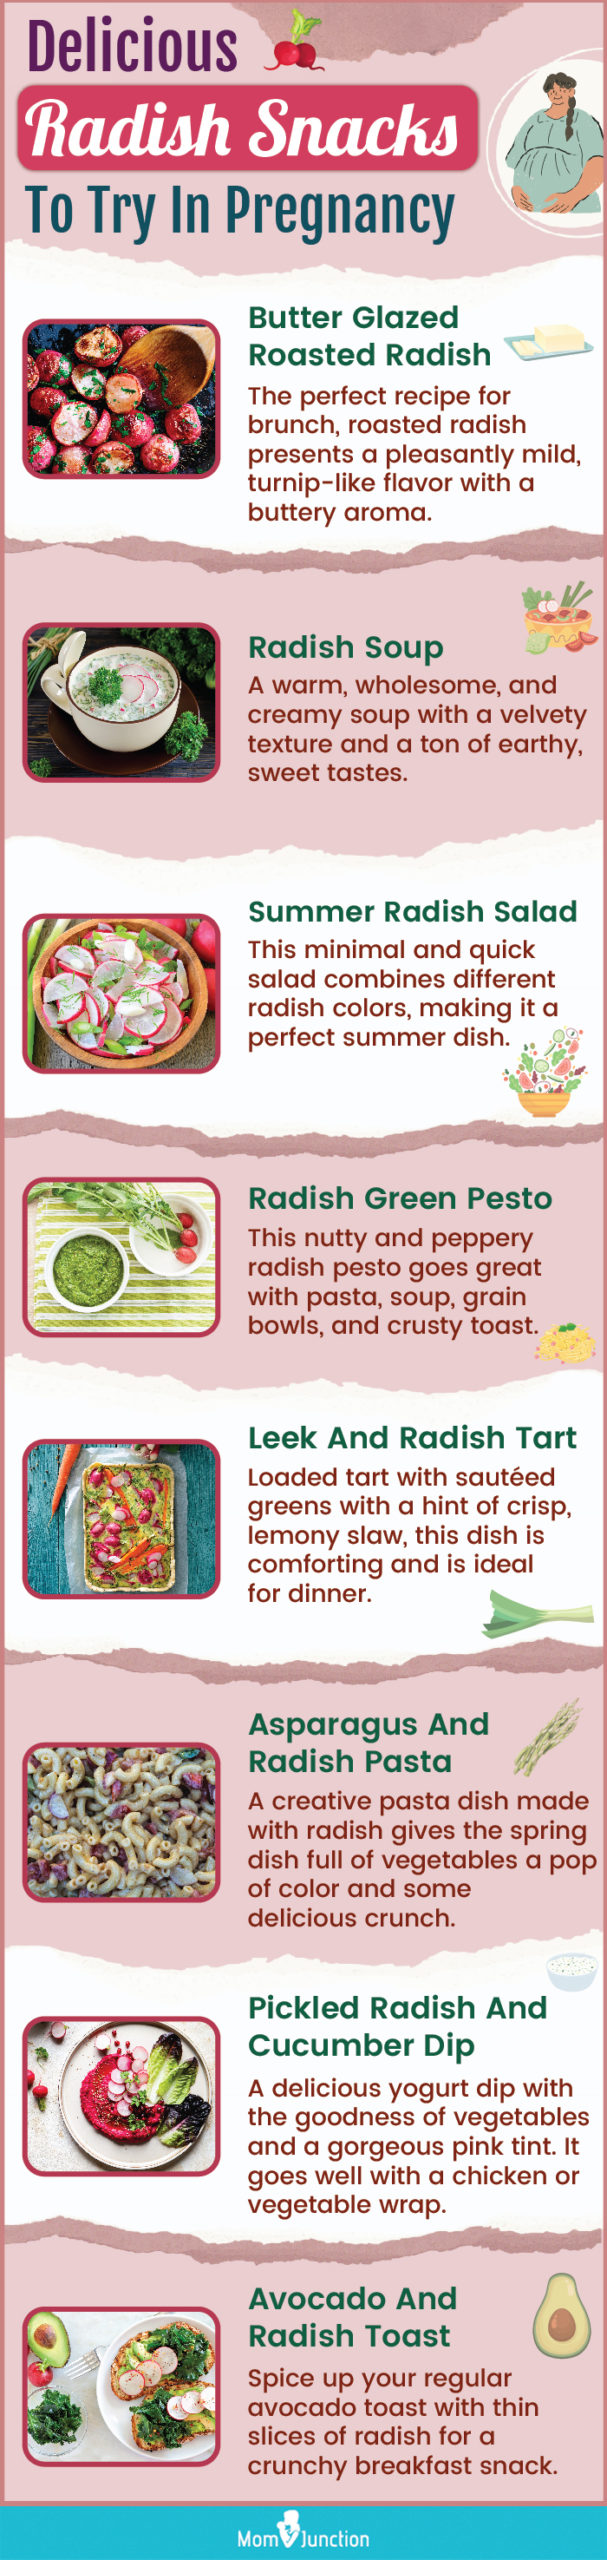 radish dishes to try during pregnancy (infographic)